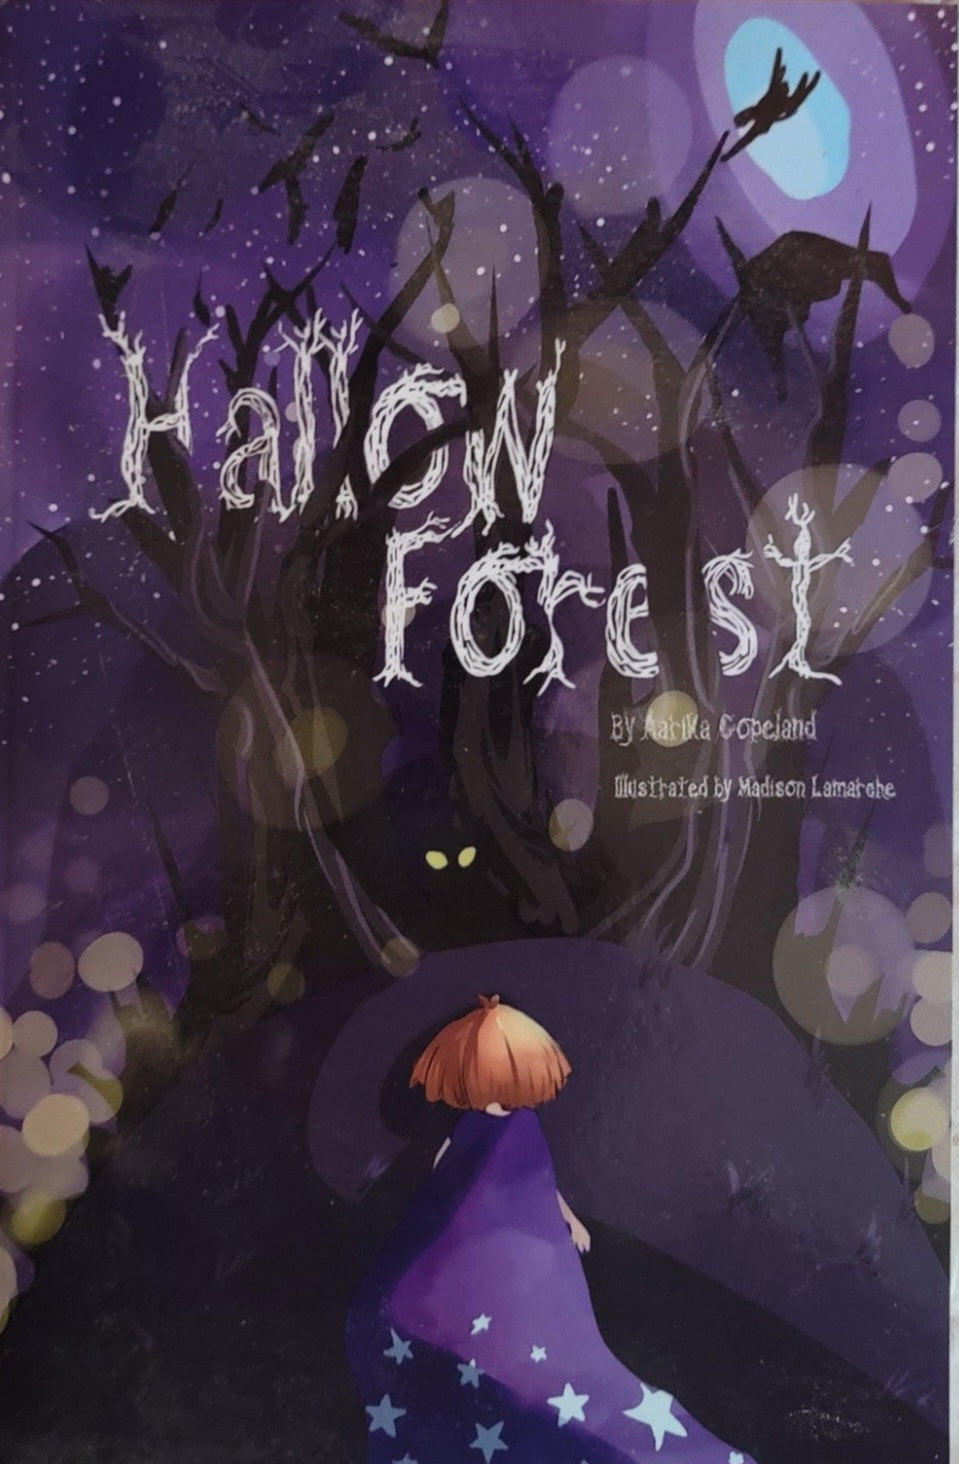 Signed "Hallow Forest" paperback